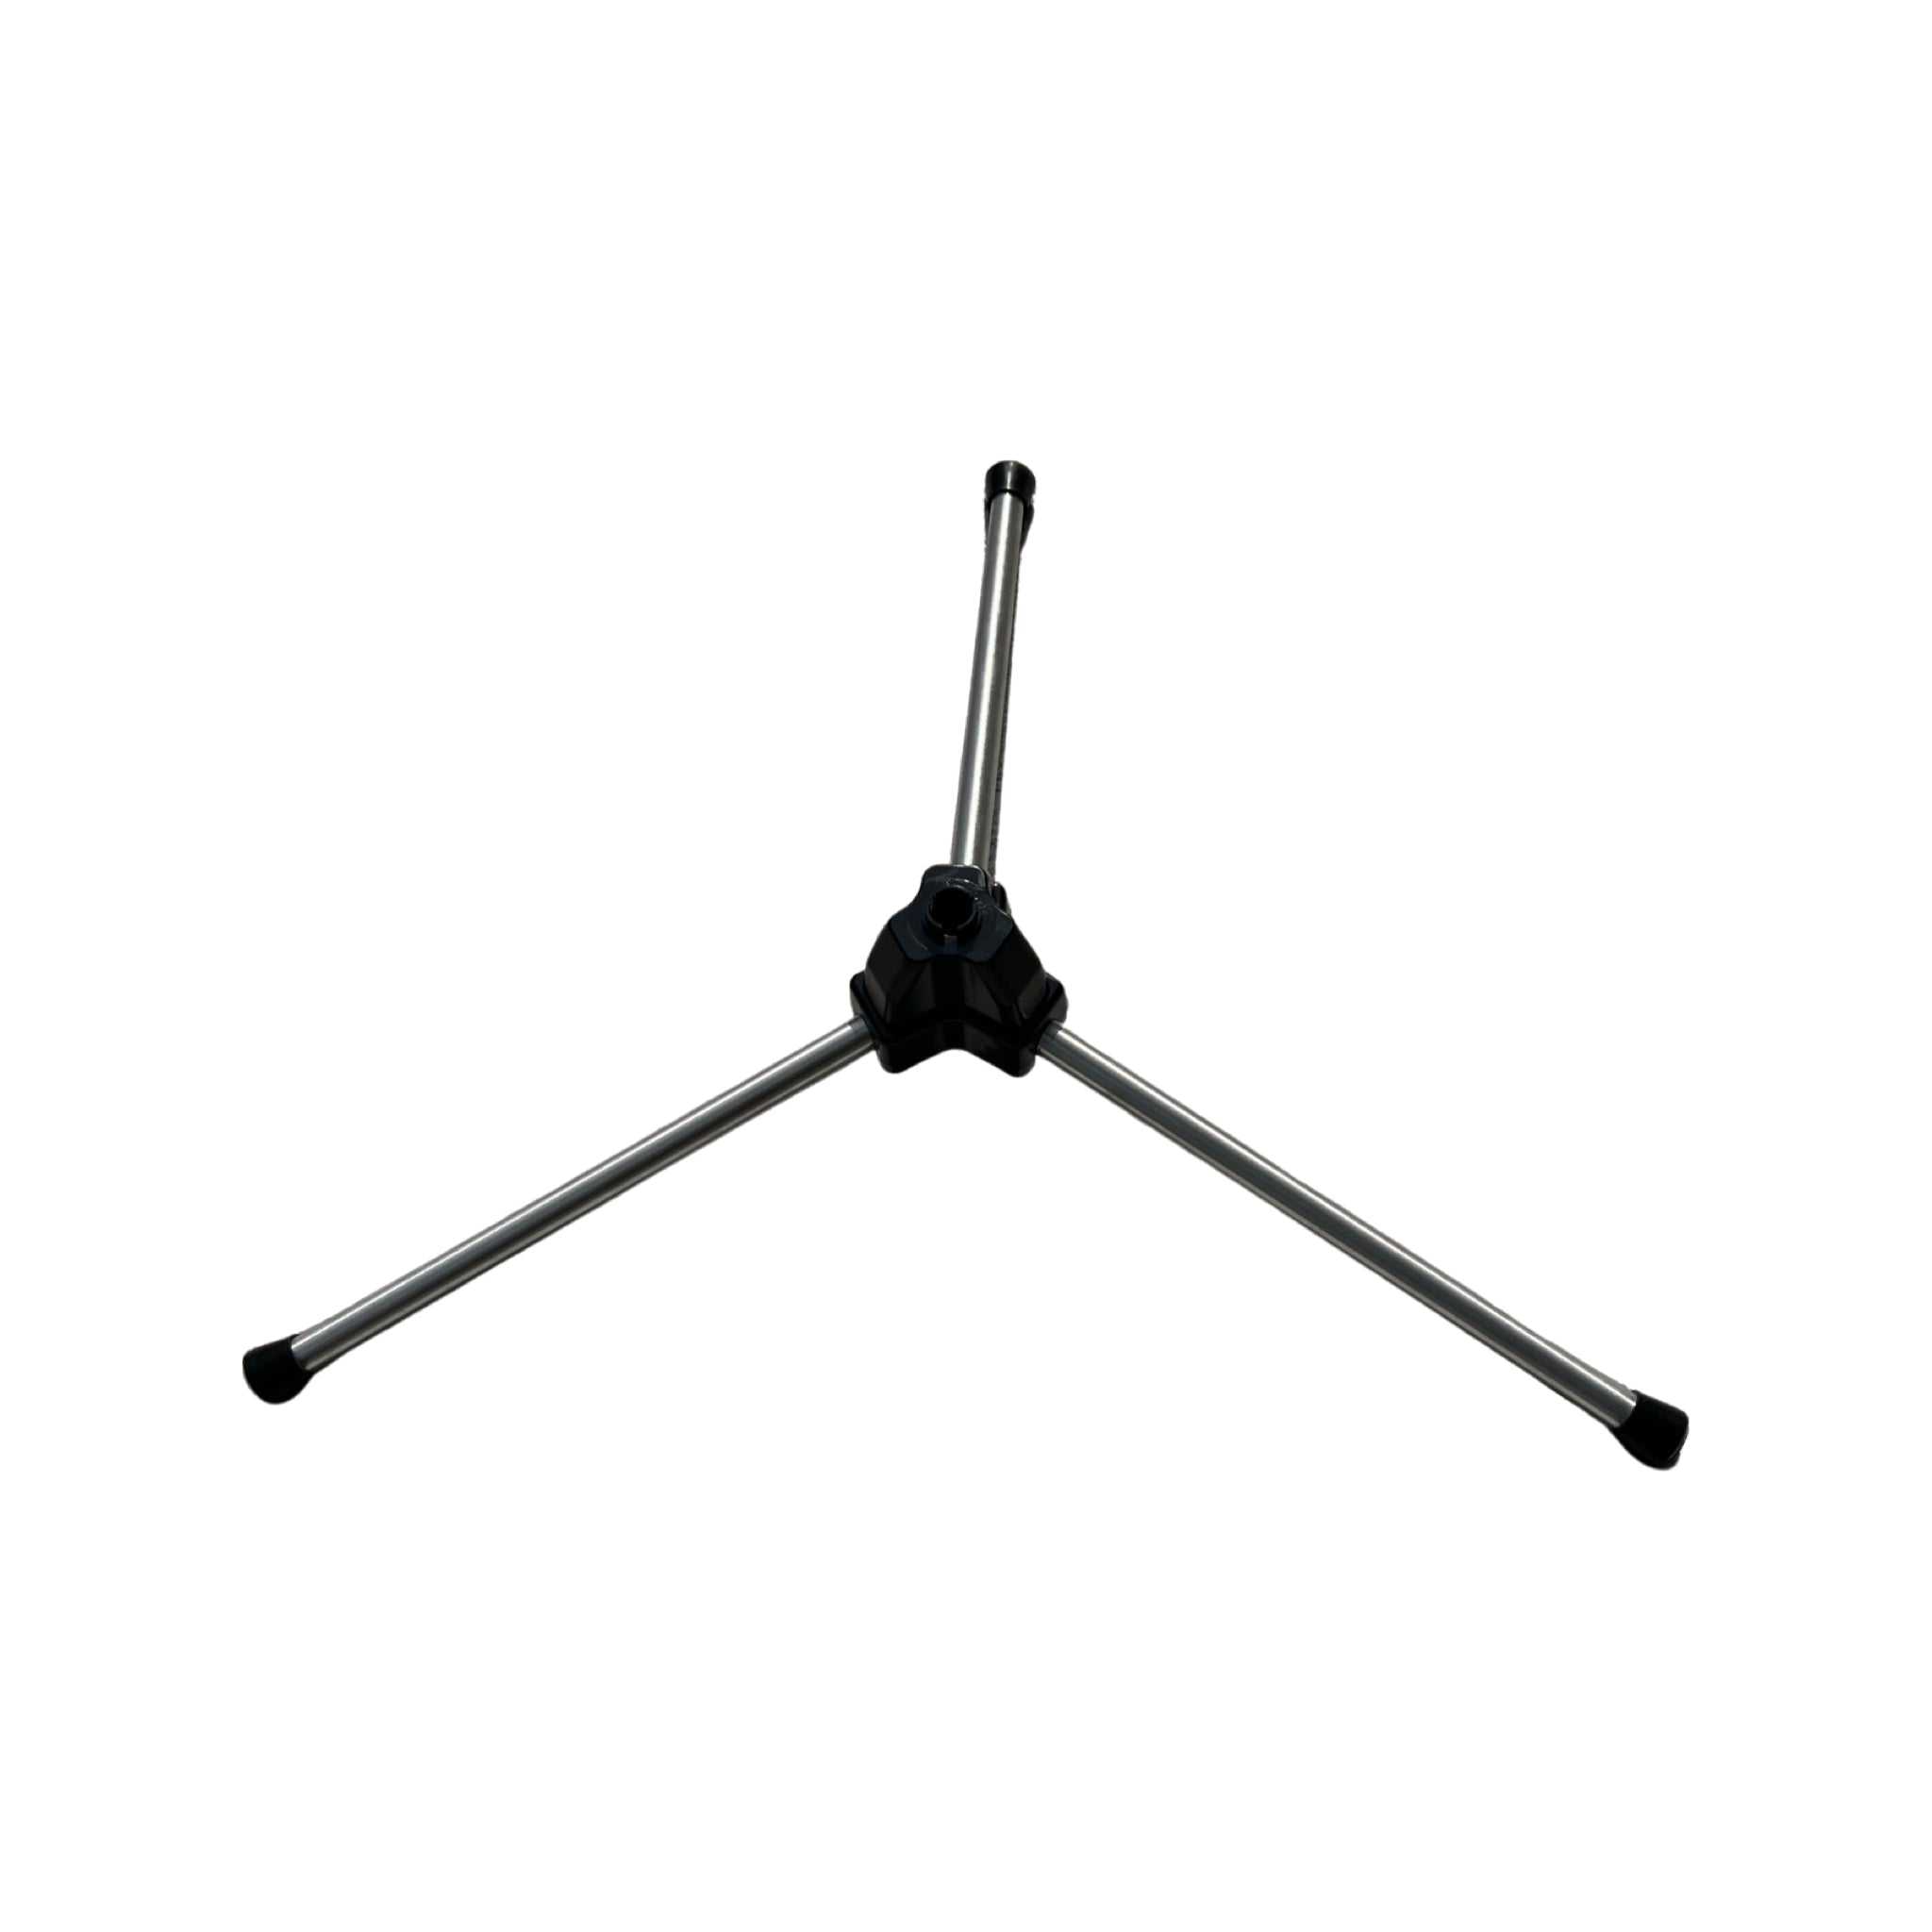 Cyclone Filter Folding Tripod Stand-Cyclone Filter Cleaner